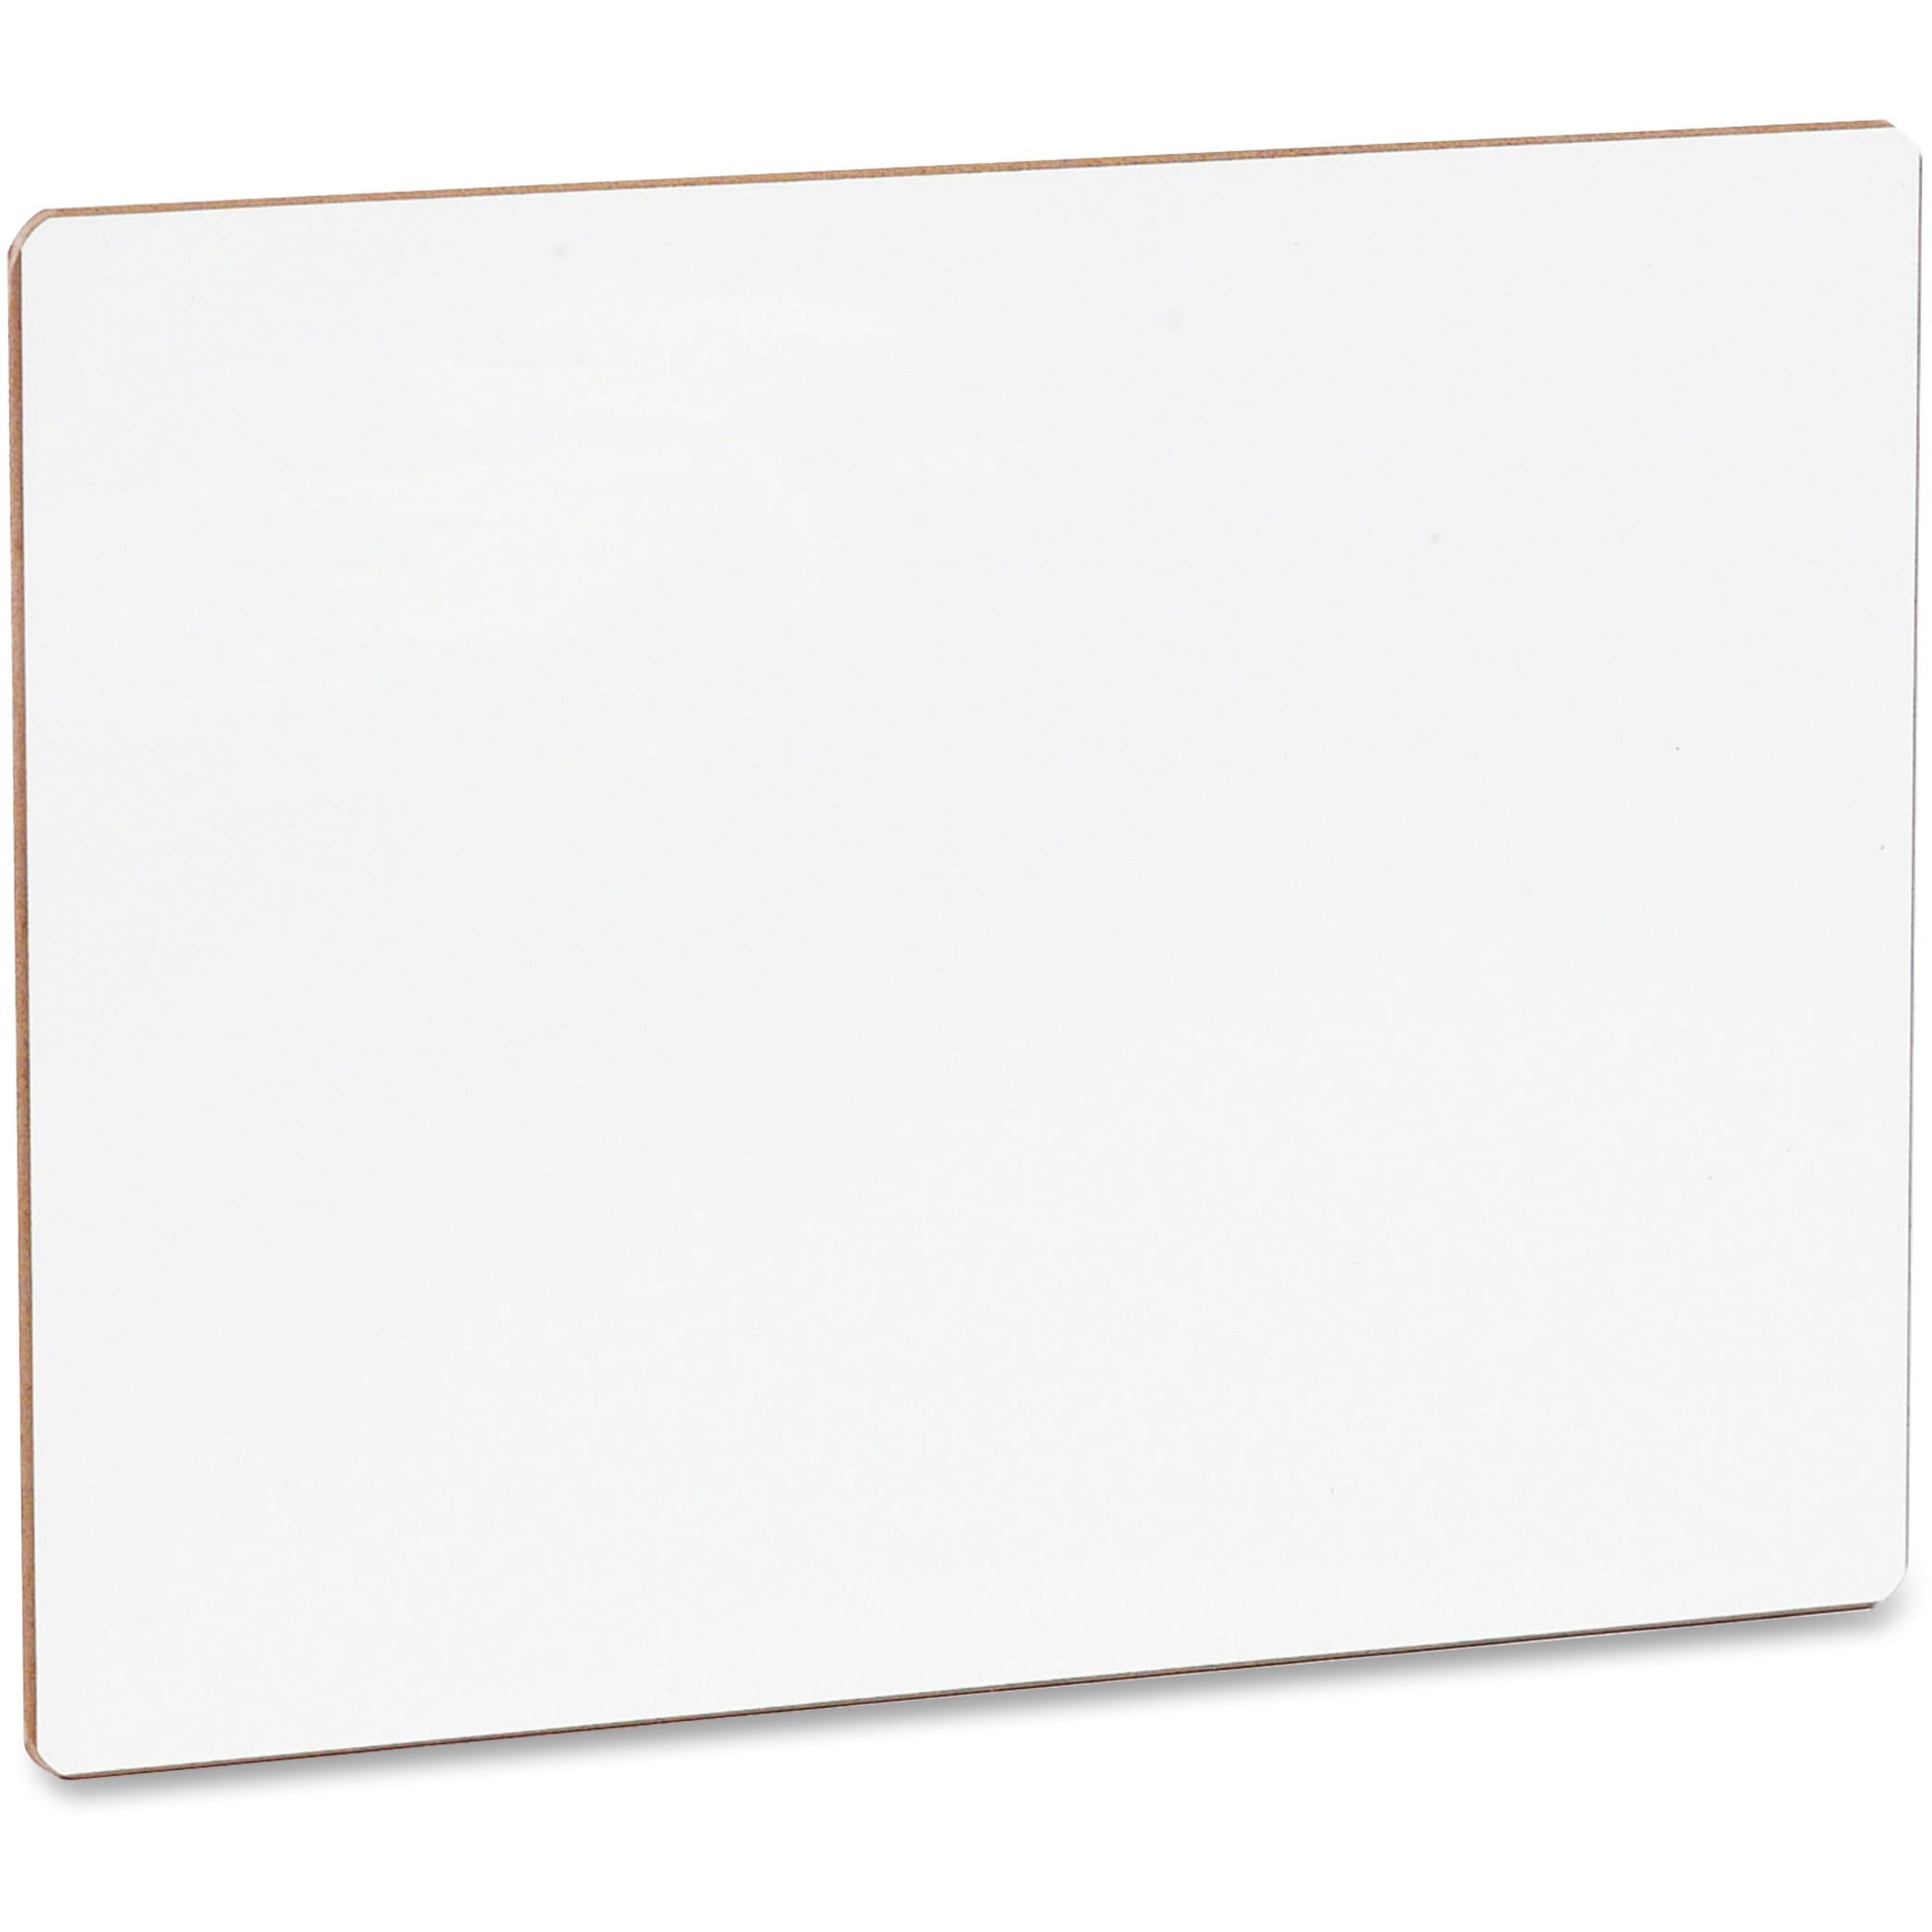 Removal Dry Erase White Board Sheet/Film-Gloss 35.4"×23.6" 900mm×600mm 